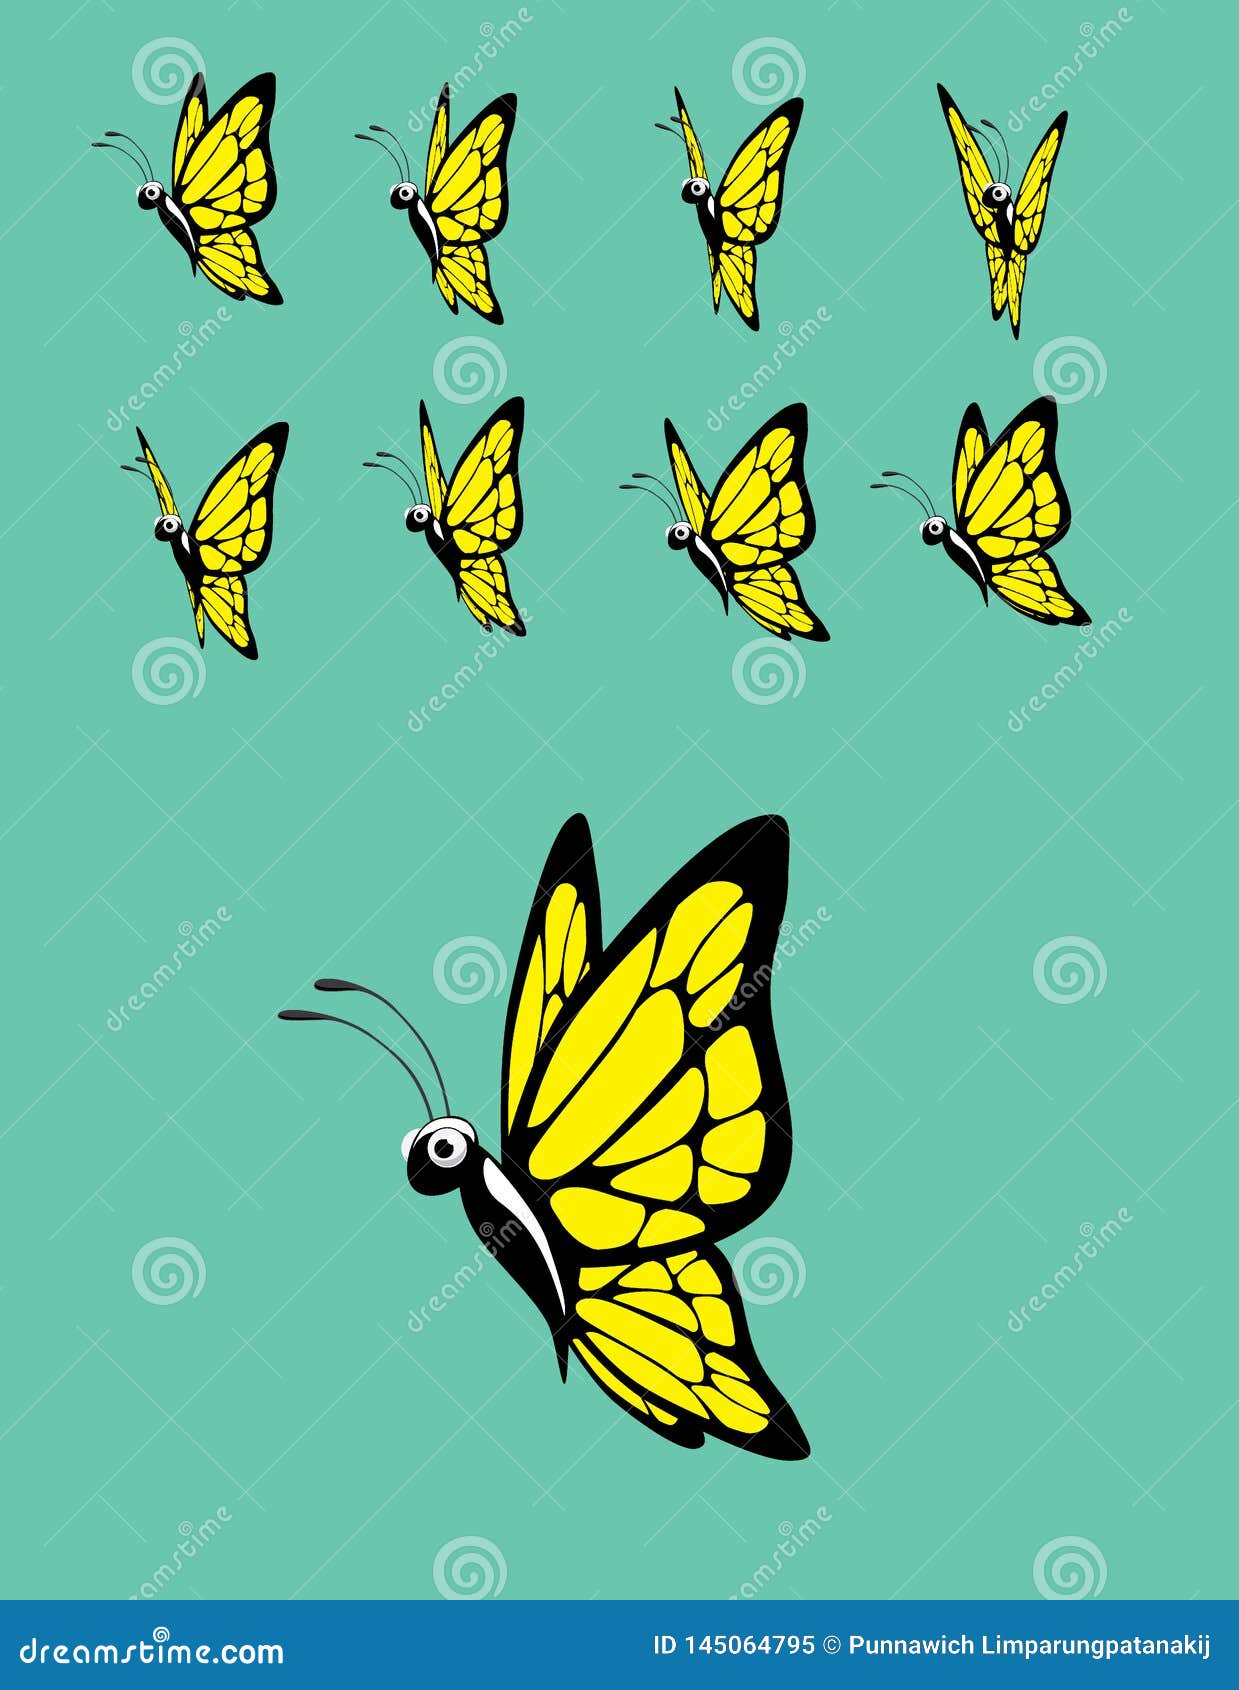 Animal Animation Sequence Monarch Butterfly Flying Cartoon Vector Stock  Vector - Illustration of monarch, motion: 145064795